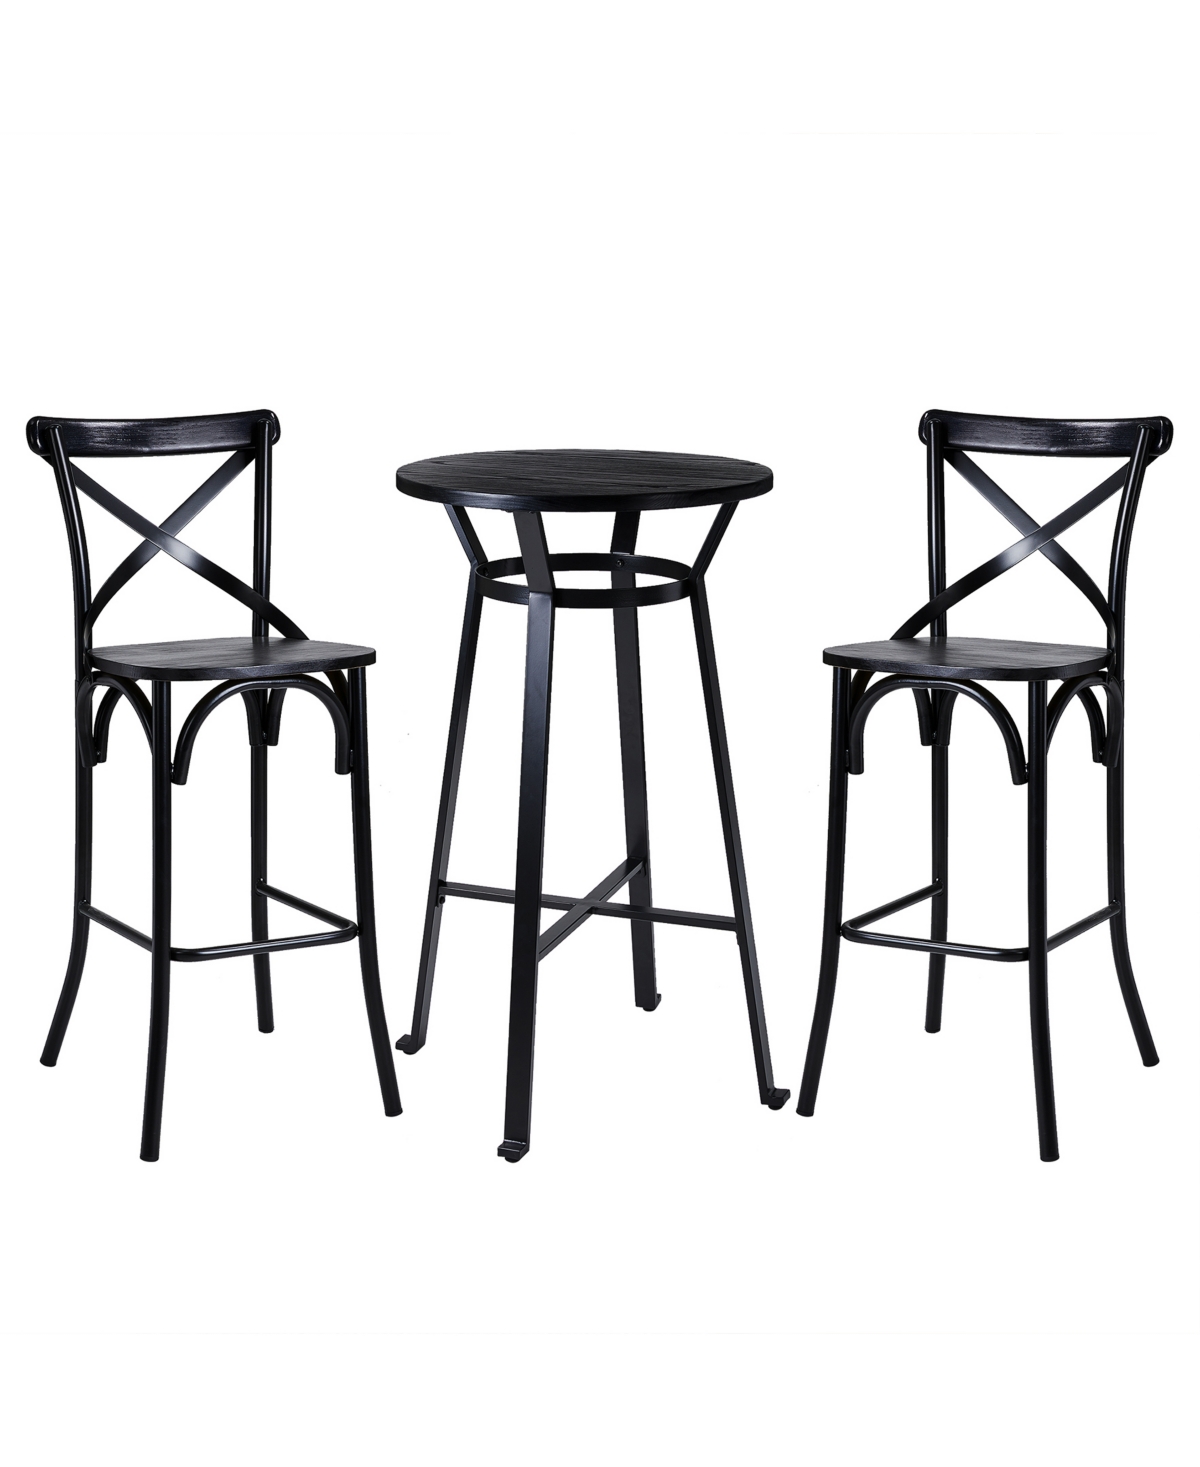 Glitzhome Pub Table And Bar Chair Set, 3 Pieces In Black